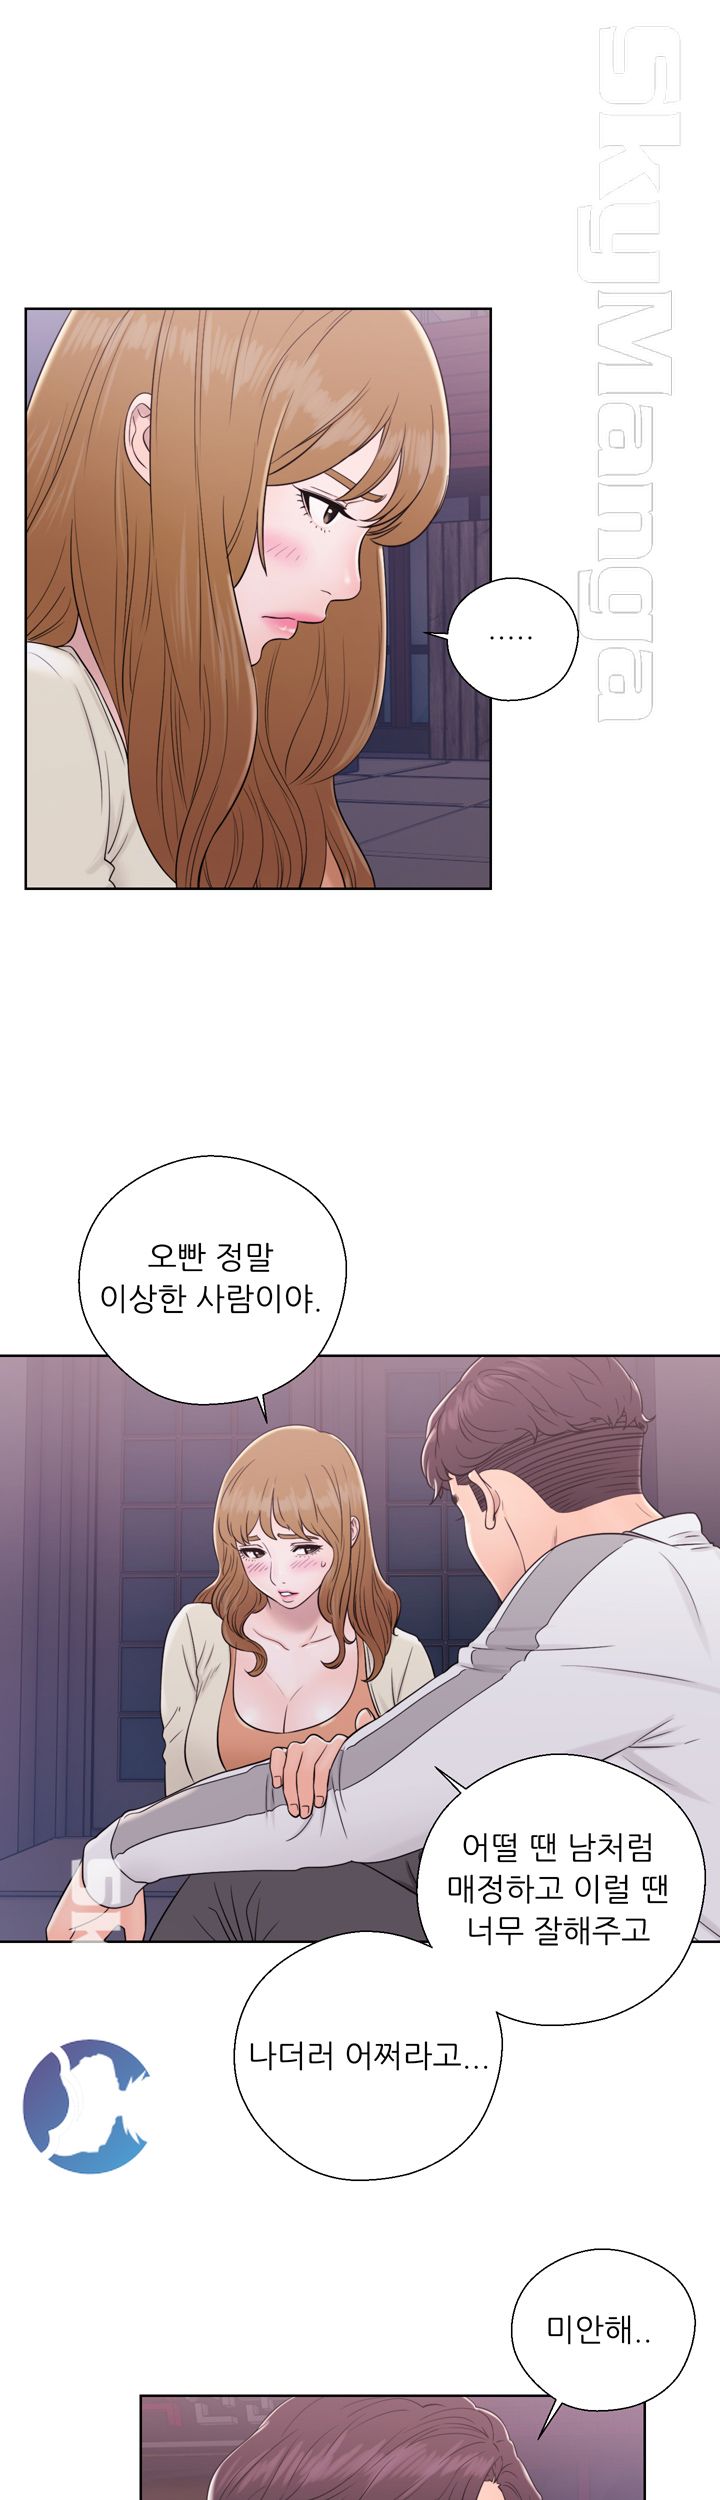 Youthful Raw - Chapter 11 Page 7